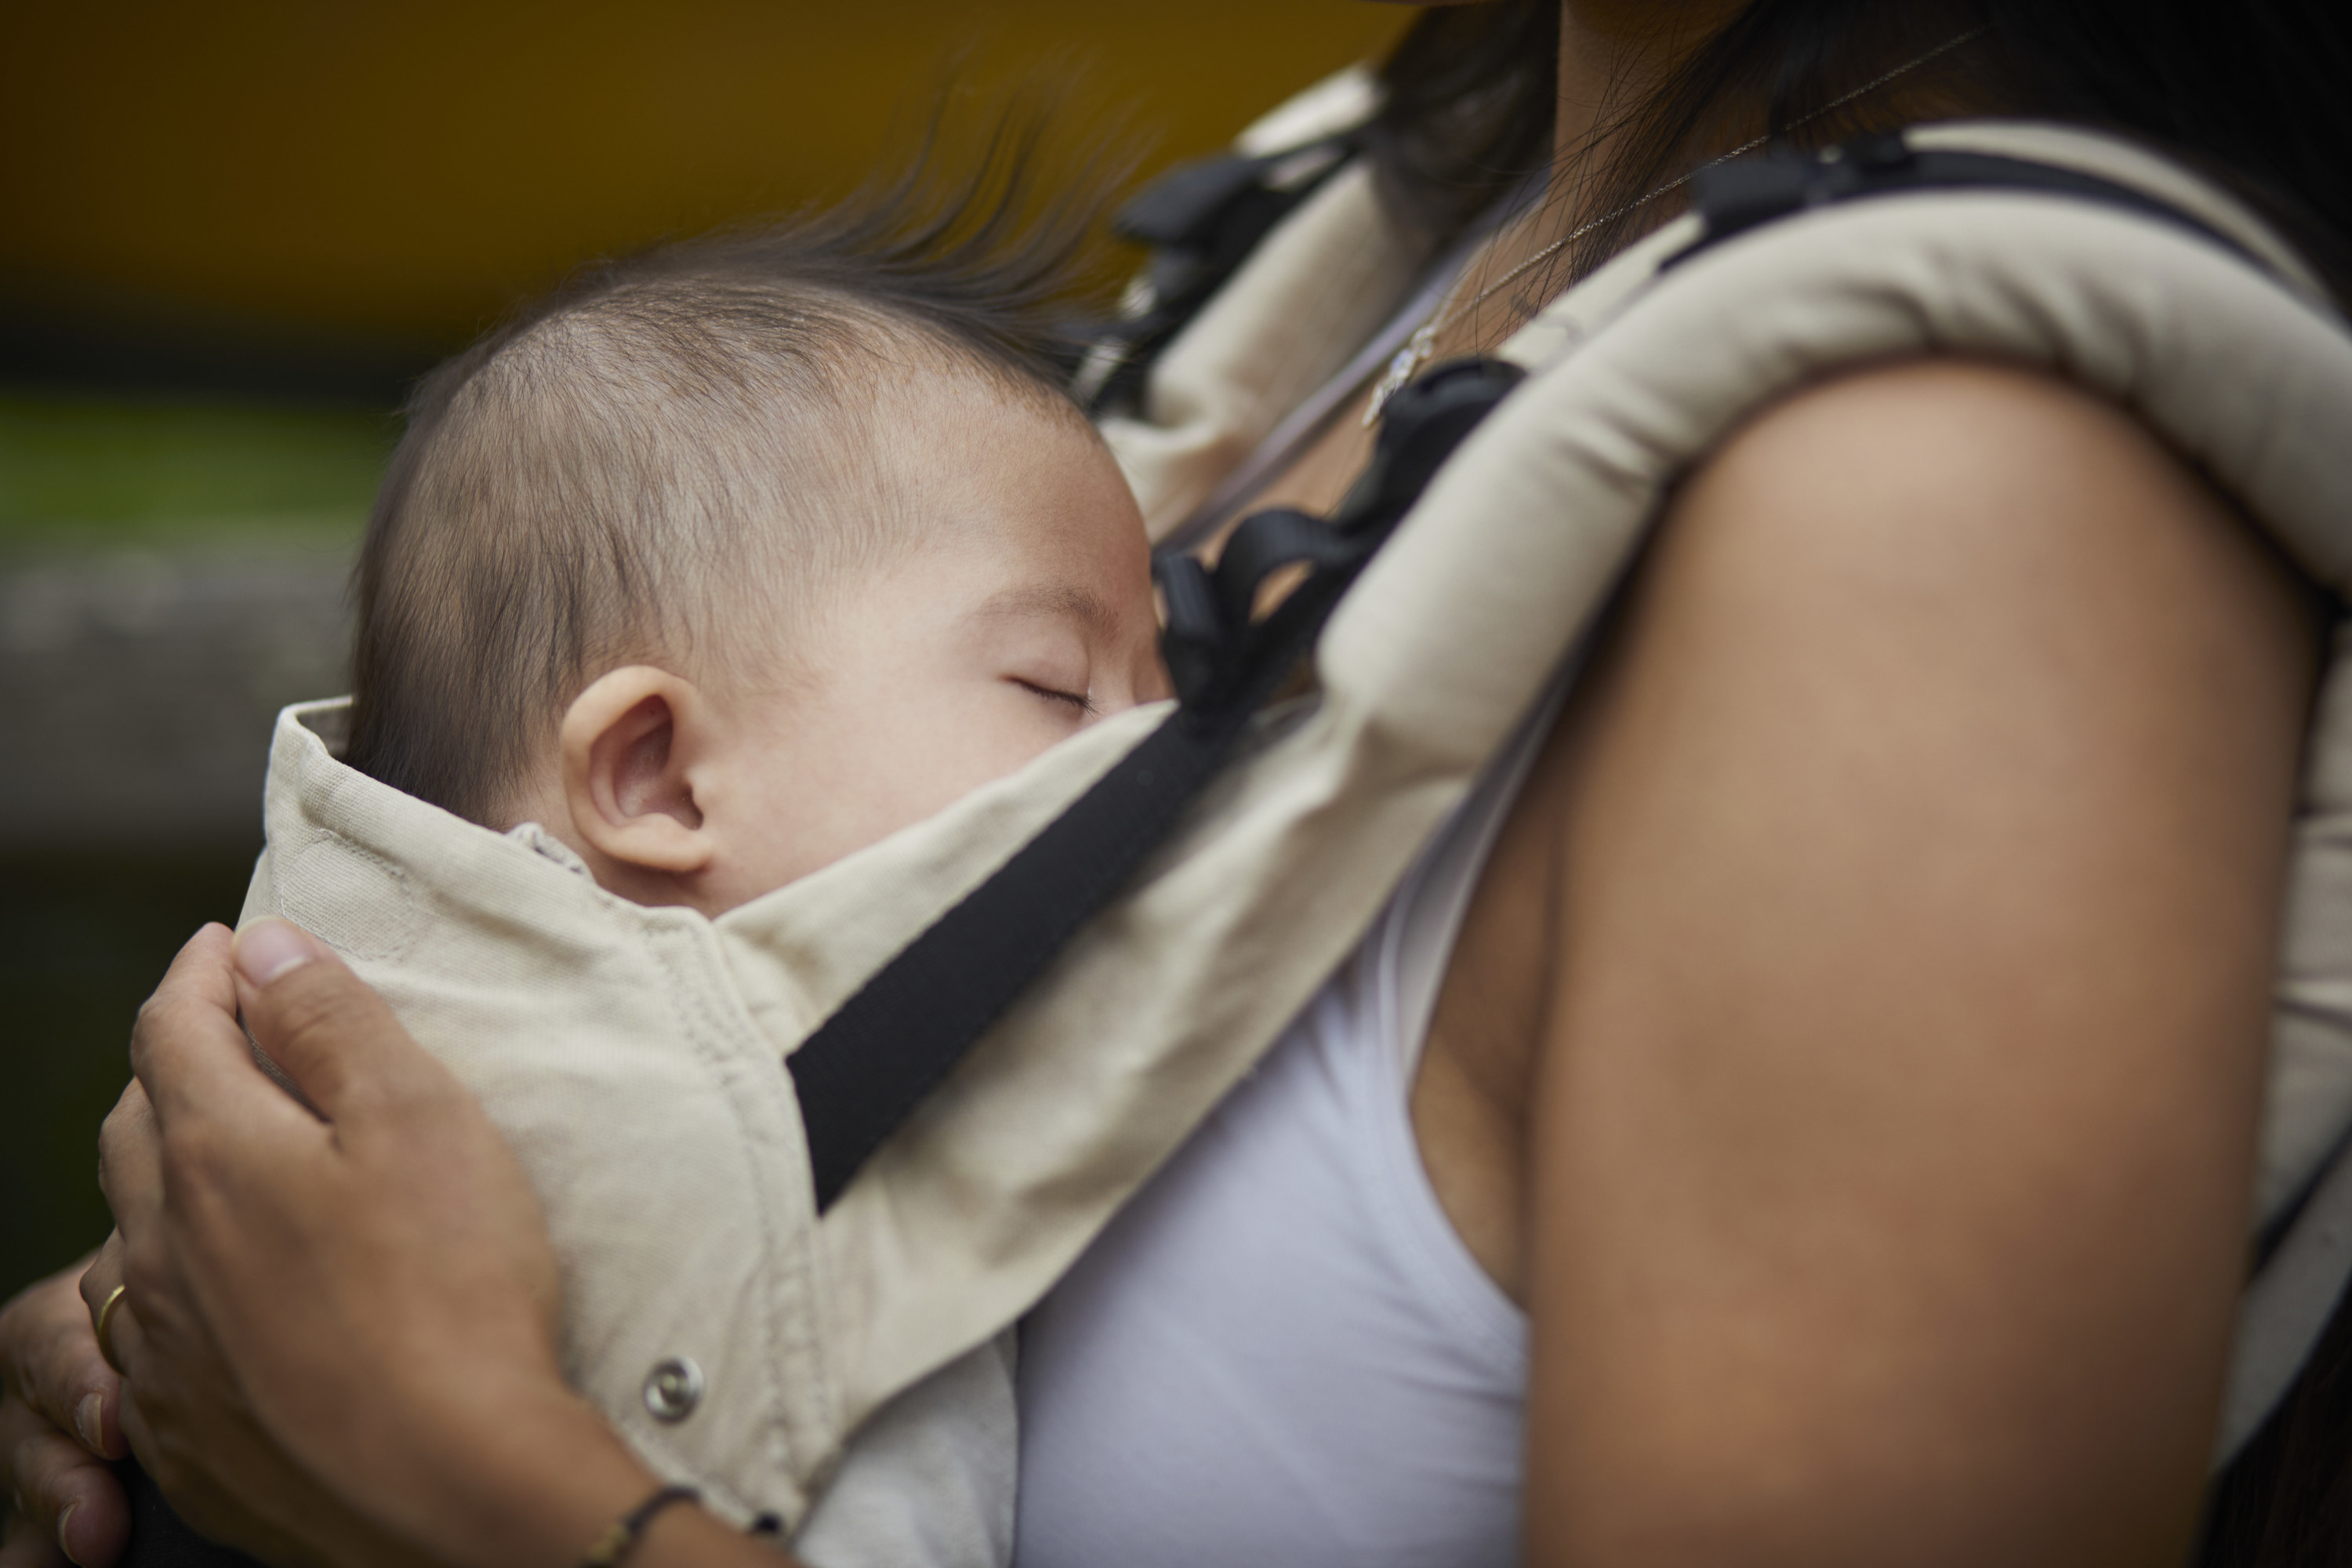 Baby in baby carrier